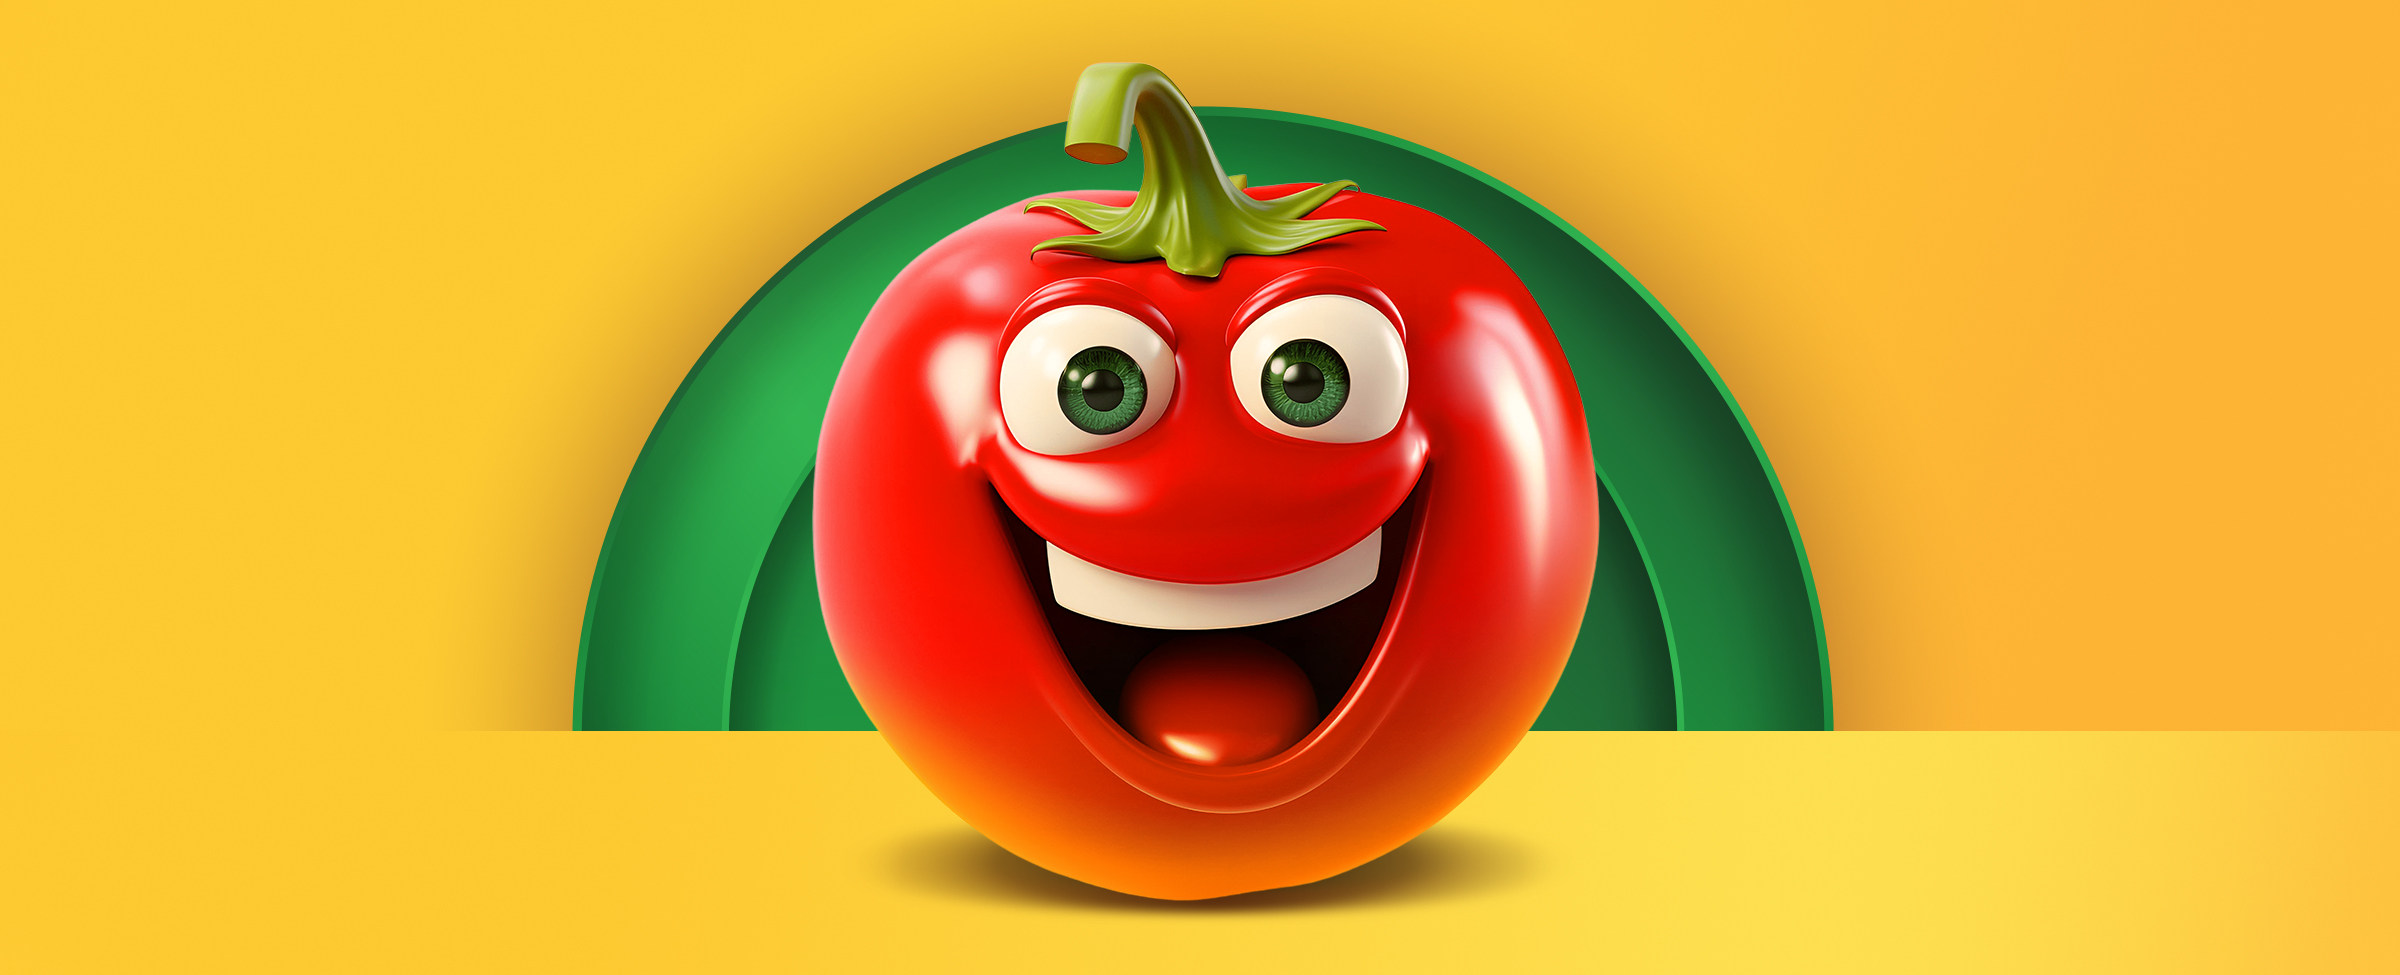 A smiling tomato is centred on a vibrant yellow background.